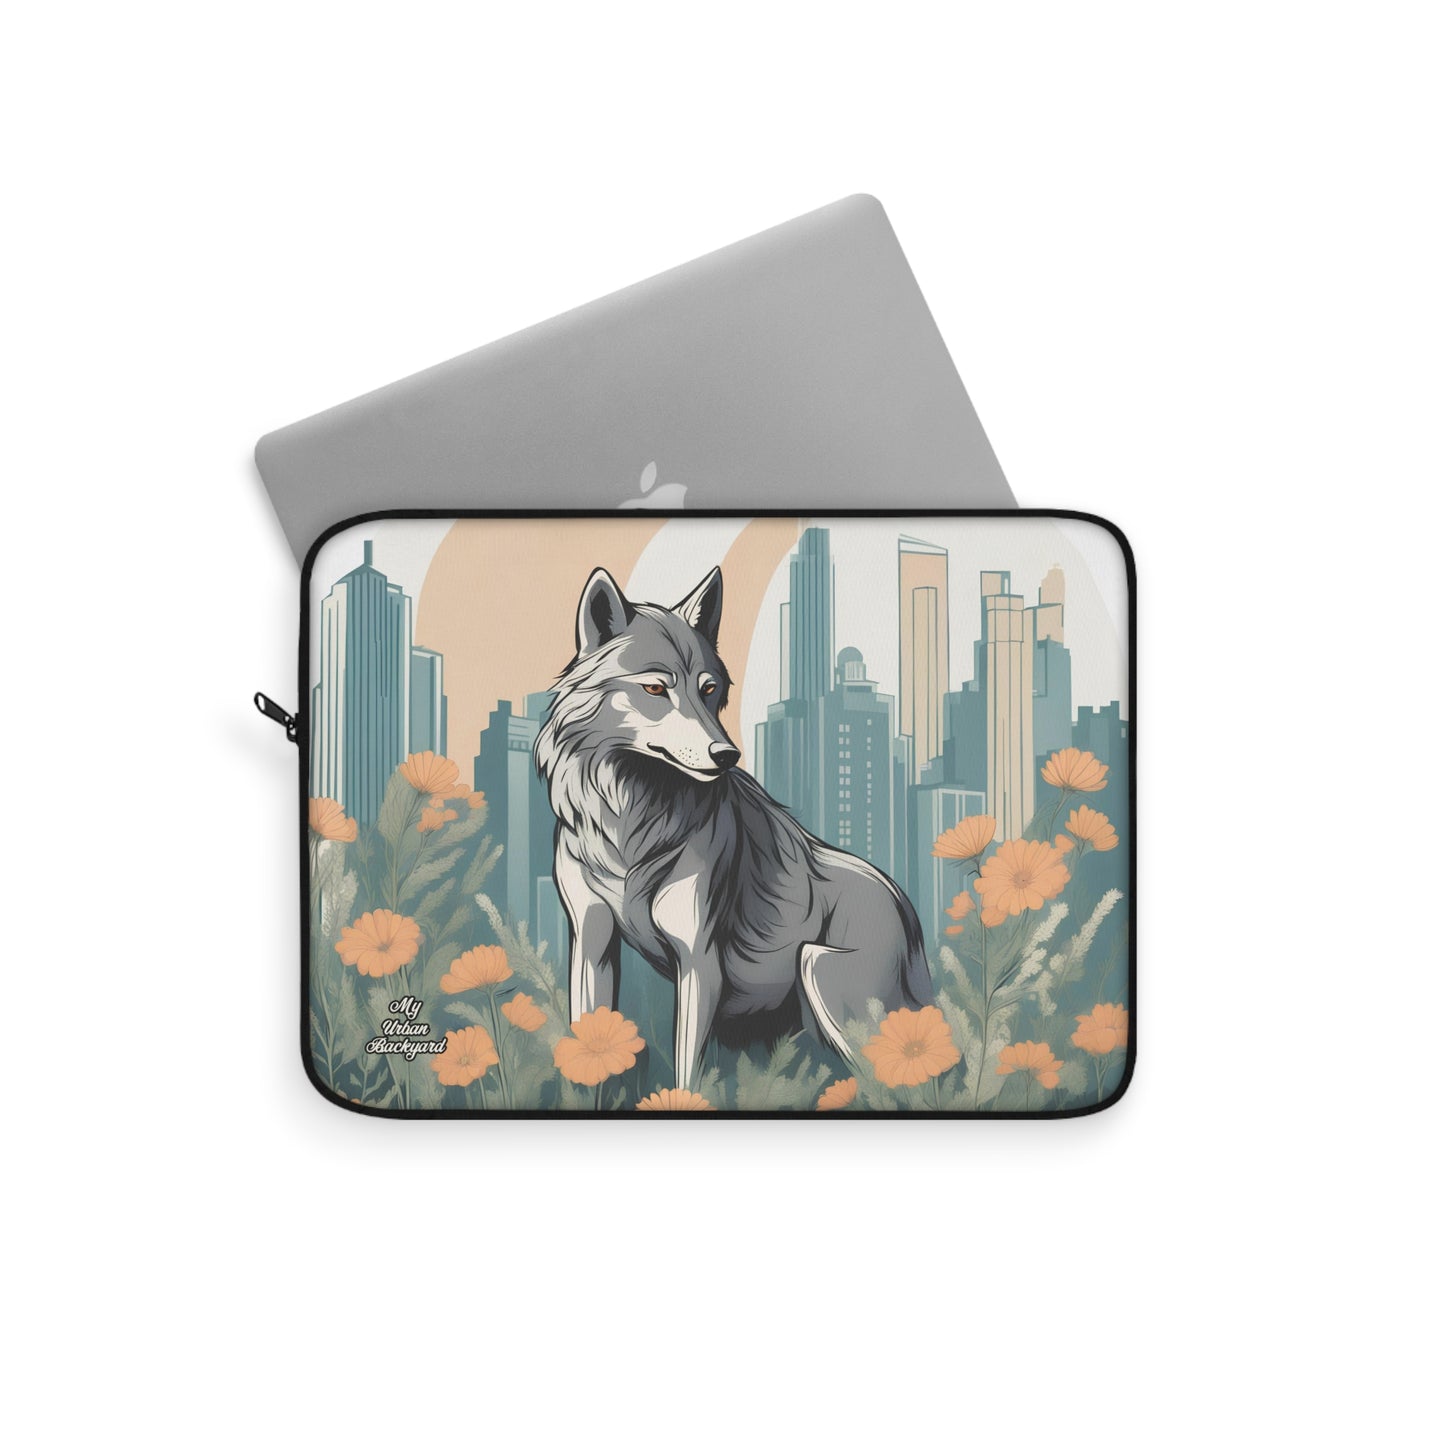 Urban Wolf, Laptop Carrying Case, Top Loading Sleeve for School or Work